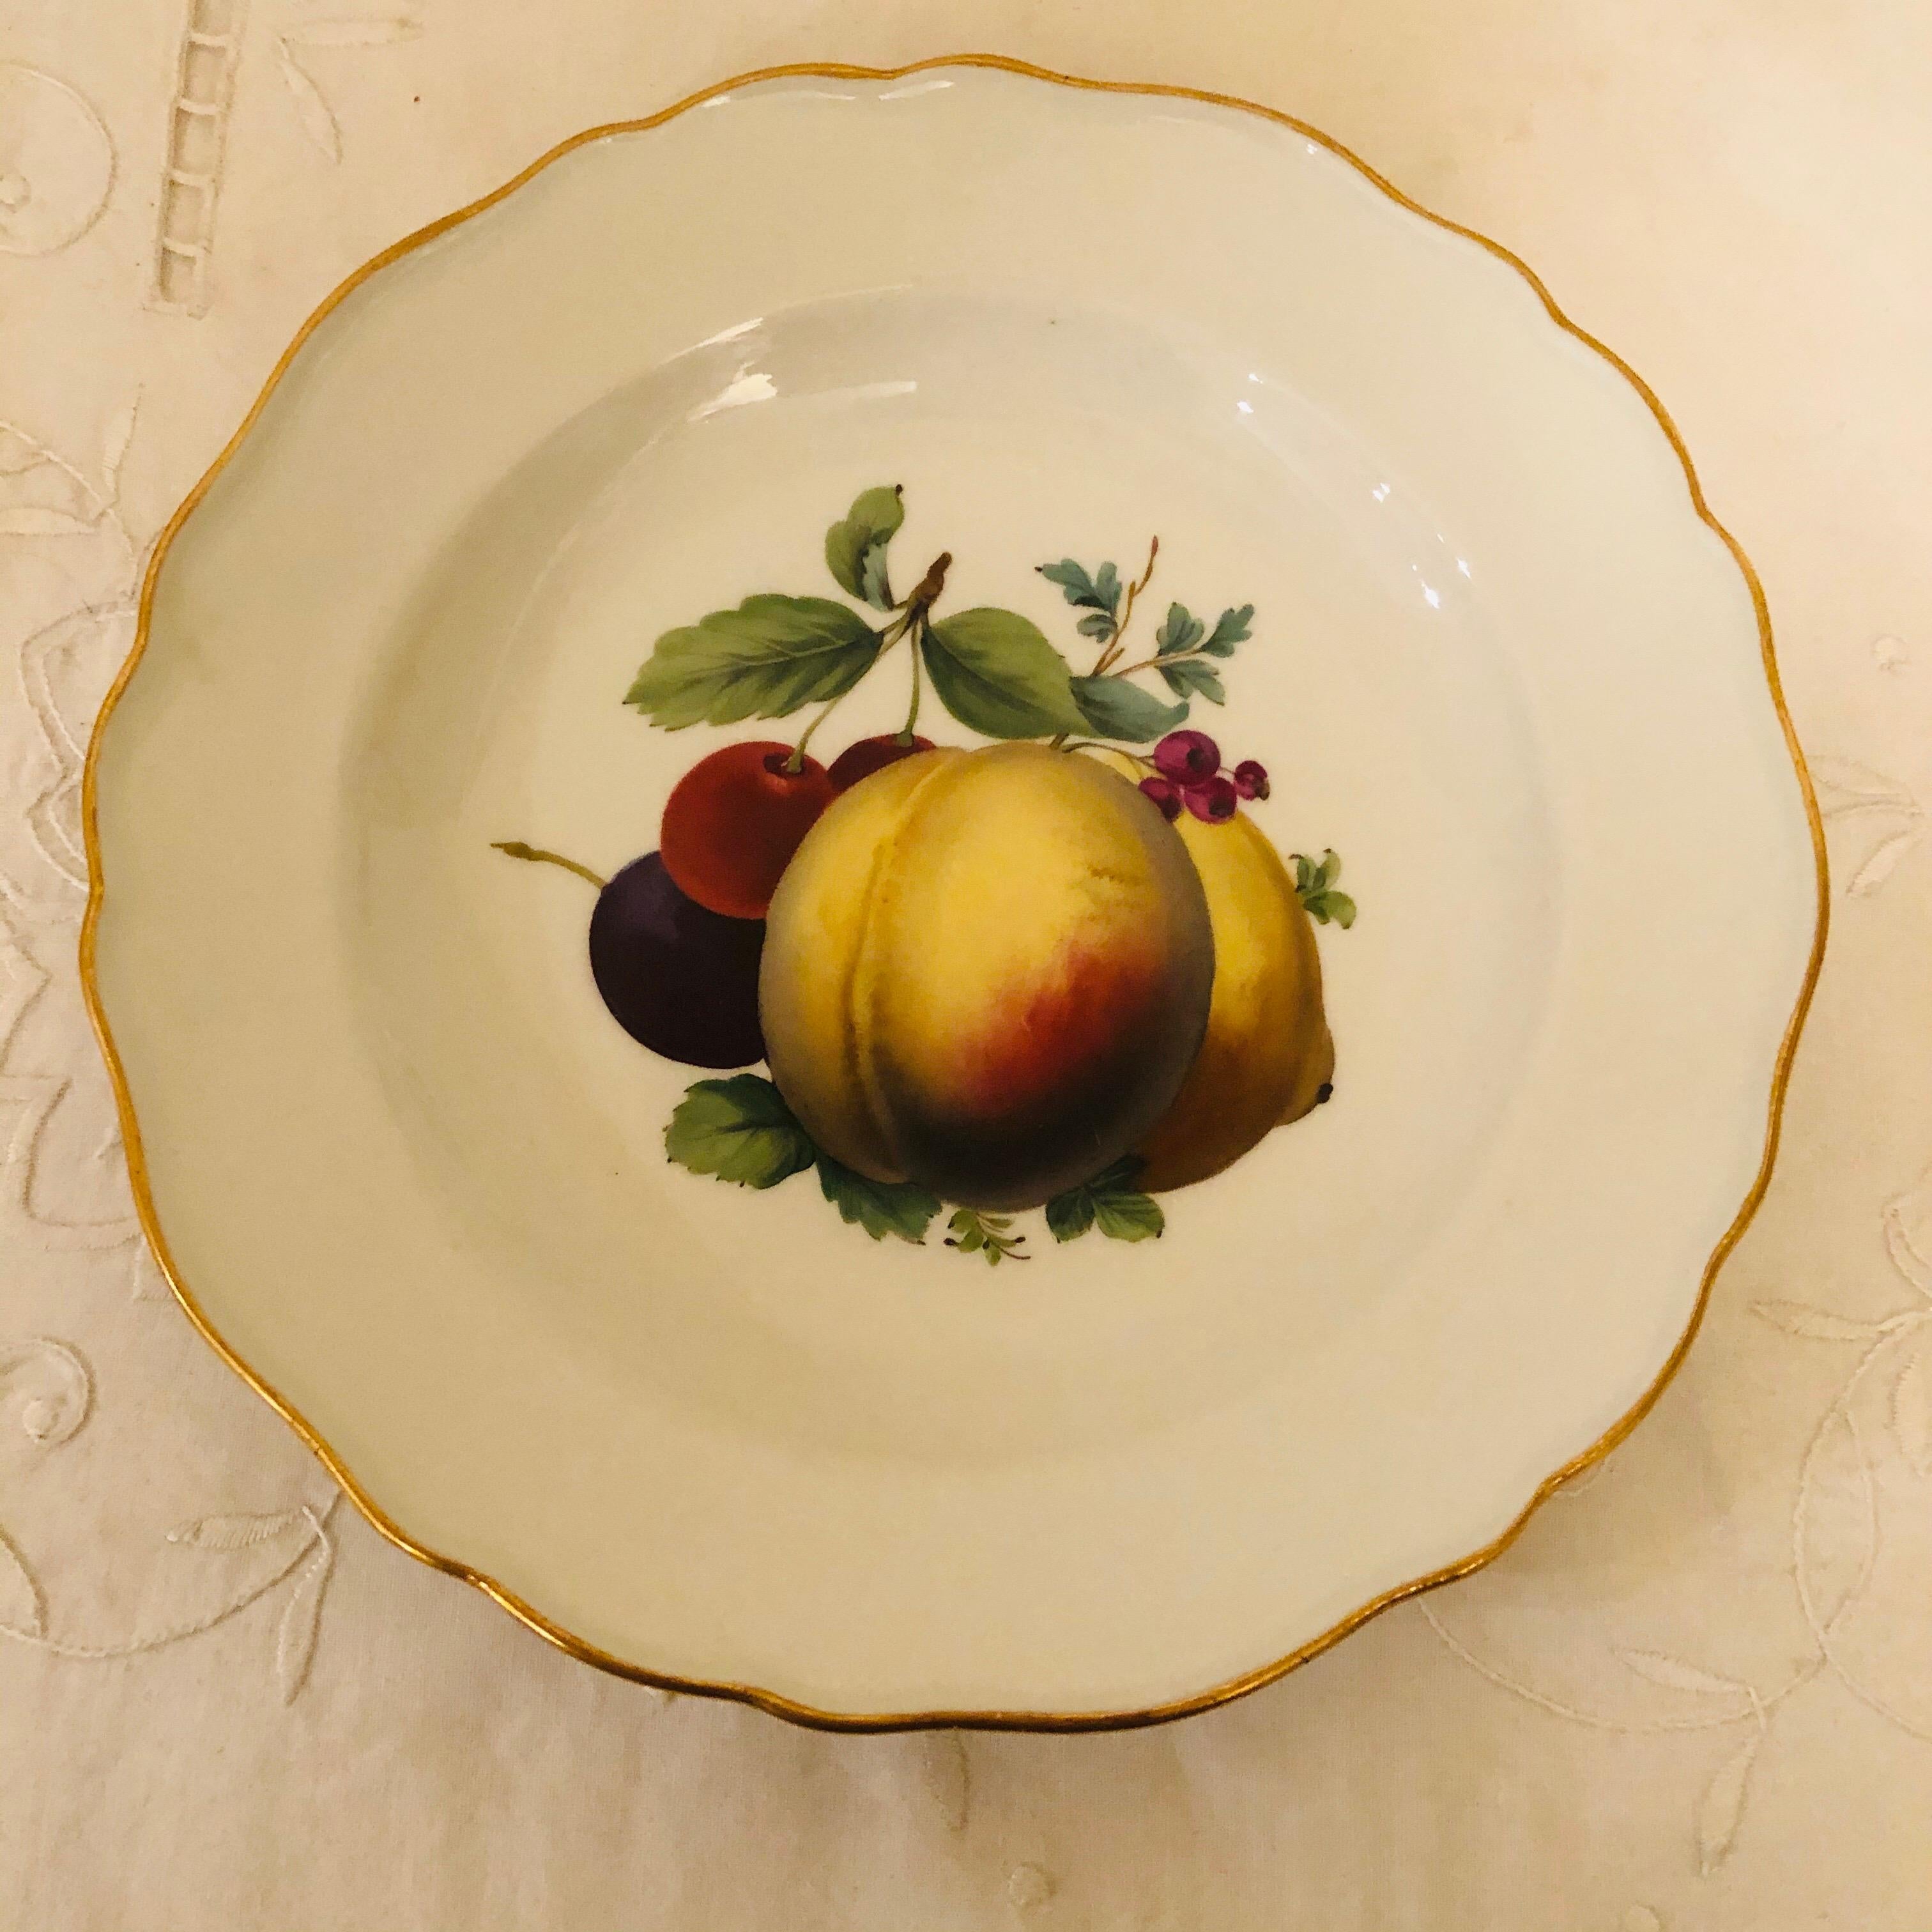 This is a wonderful set of twelve Meissen dessert plates each masterfully painted with different fruit paintings. They are from 1880s, and they are all the best first quality Meissen. The paintings of the fruits on these plates are museum quality.